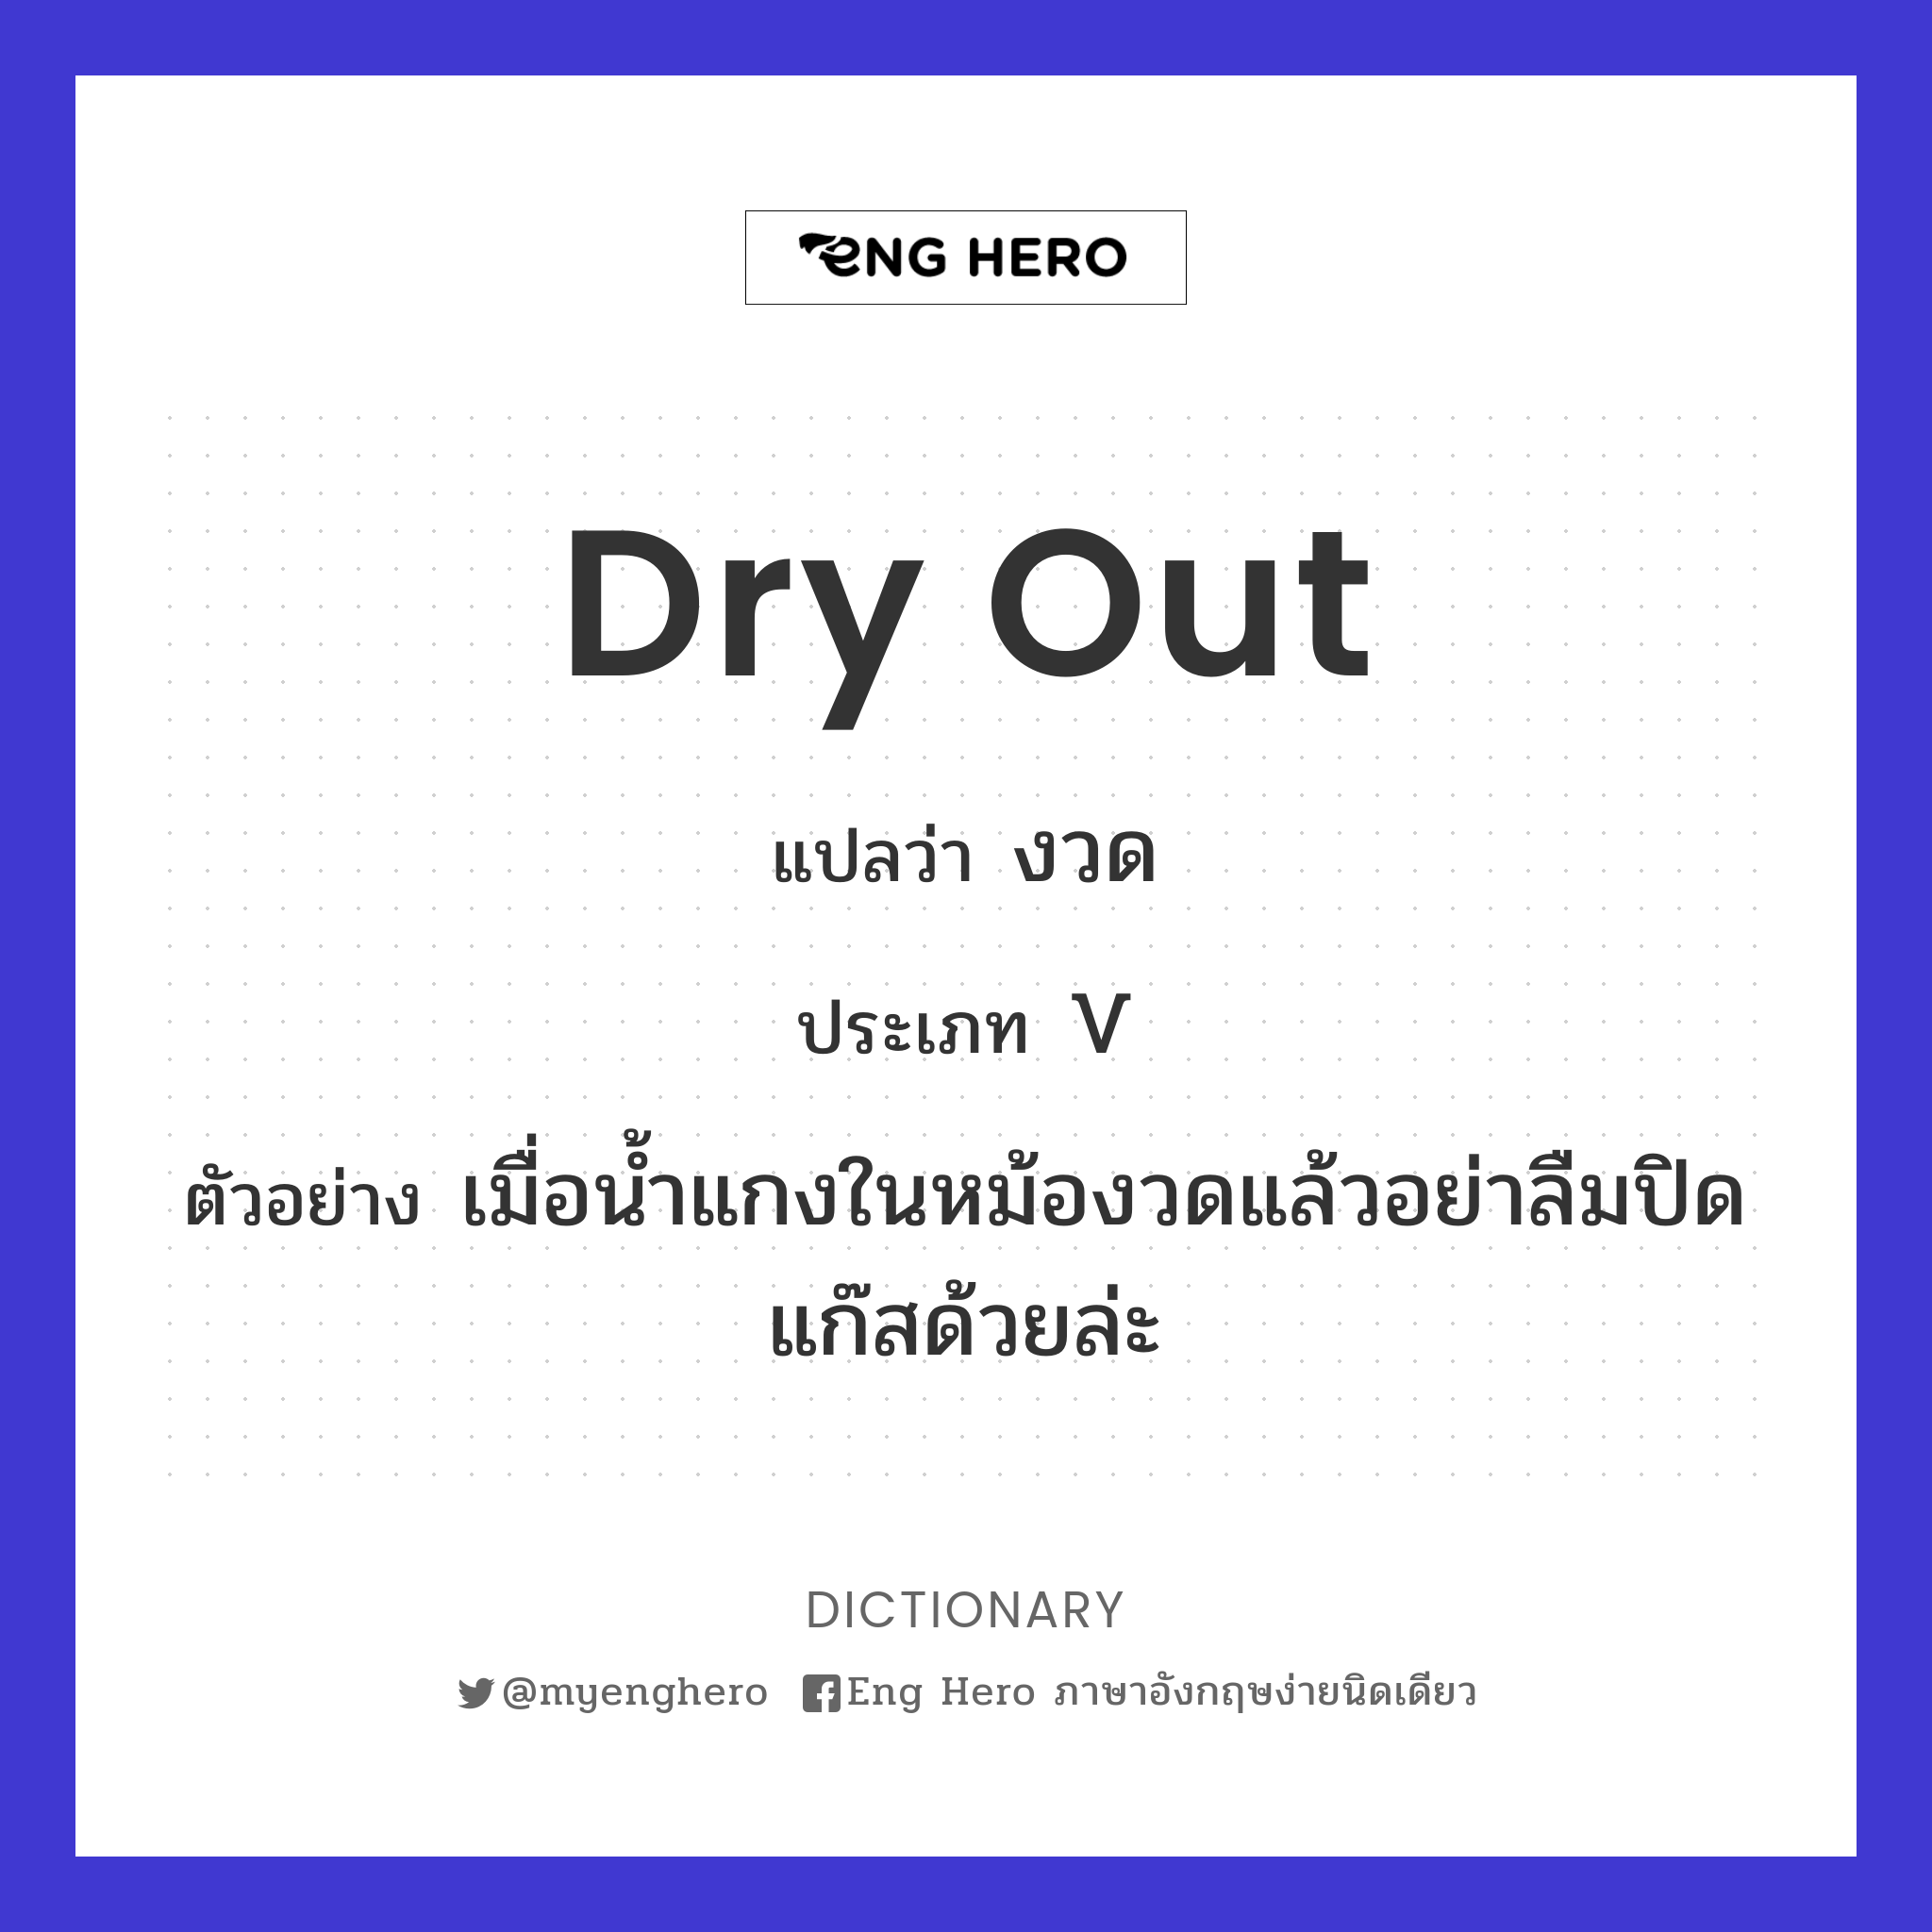 dry out